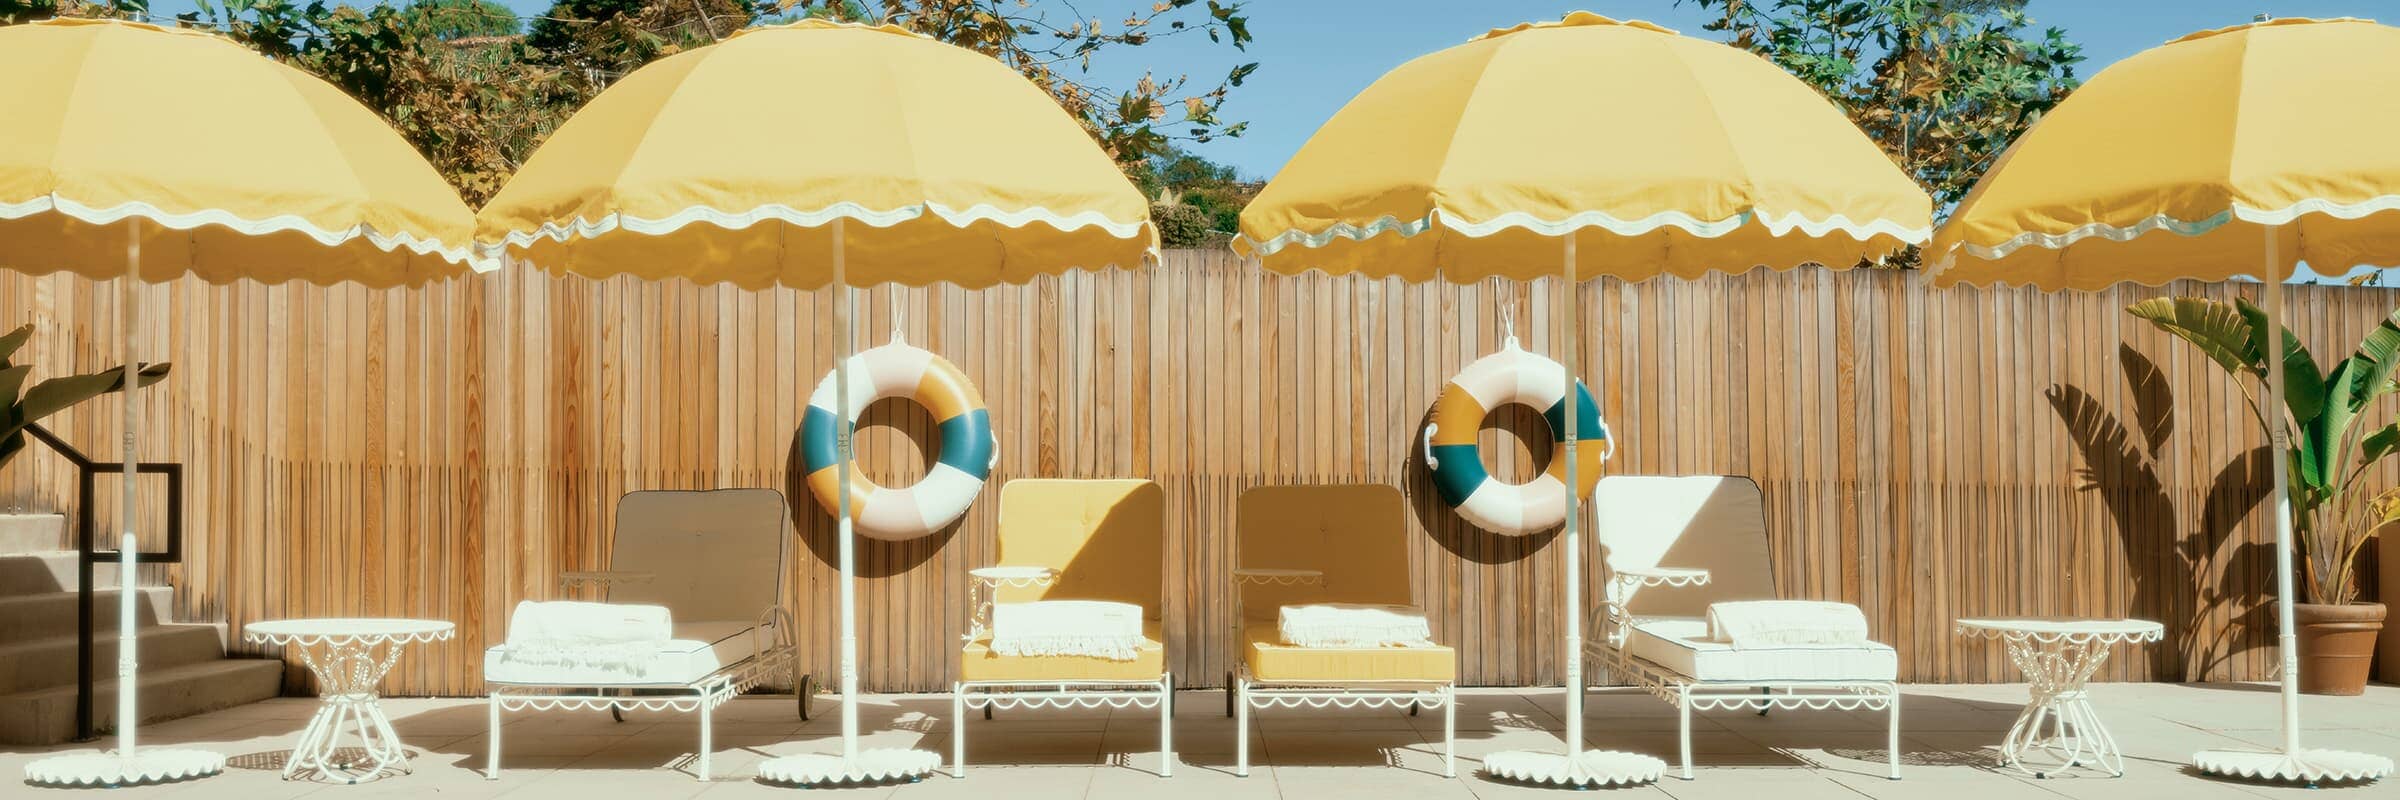 yellow patio umbrellas poolside with sun loungers